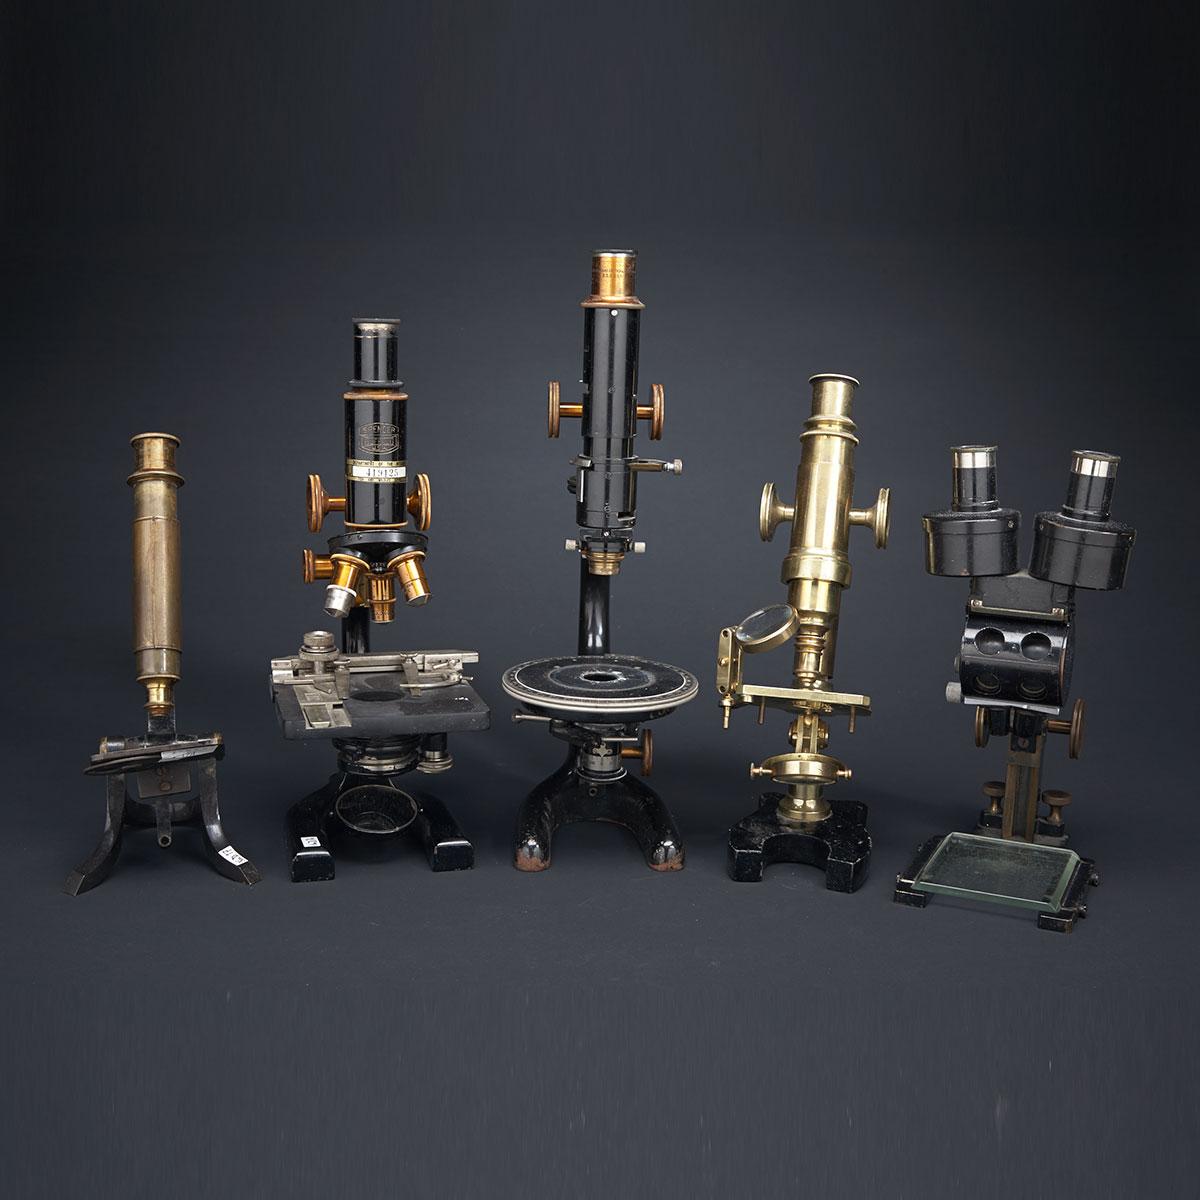 Group of Five Victorian and Edwardian Microscopes, 19th and early 20th centuries